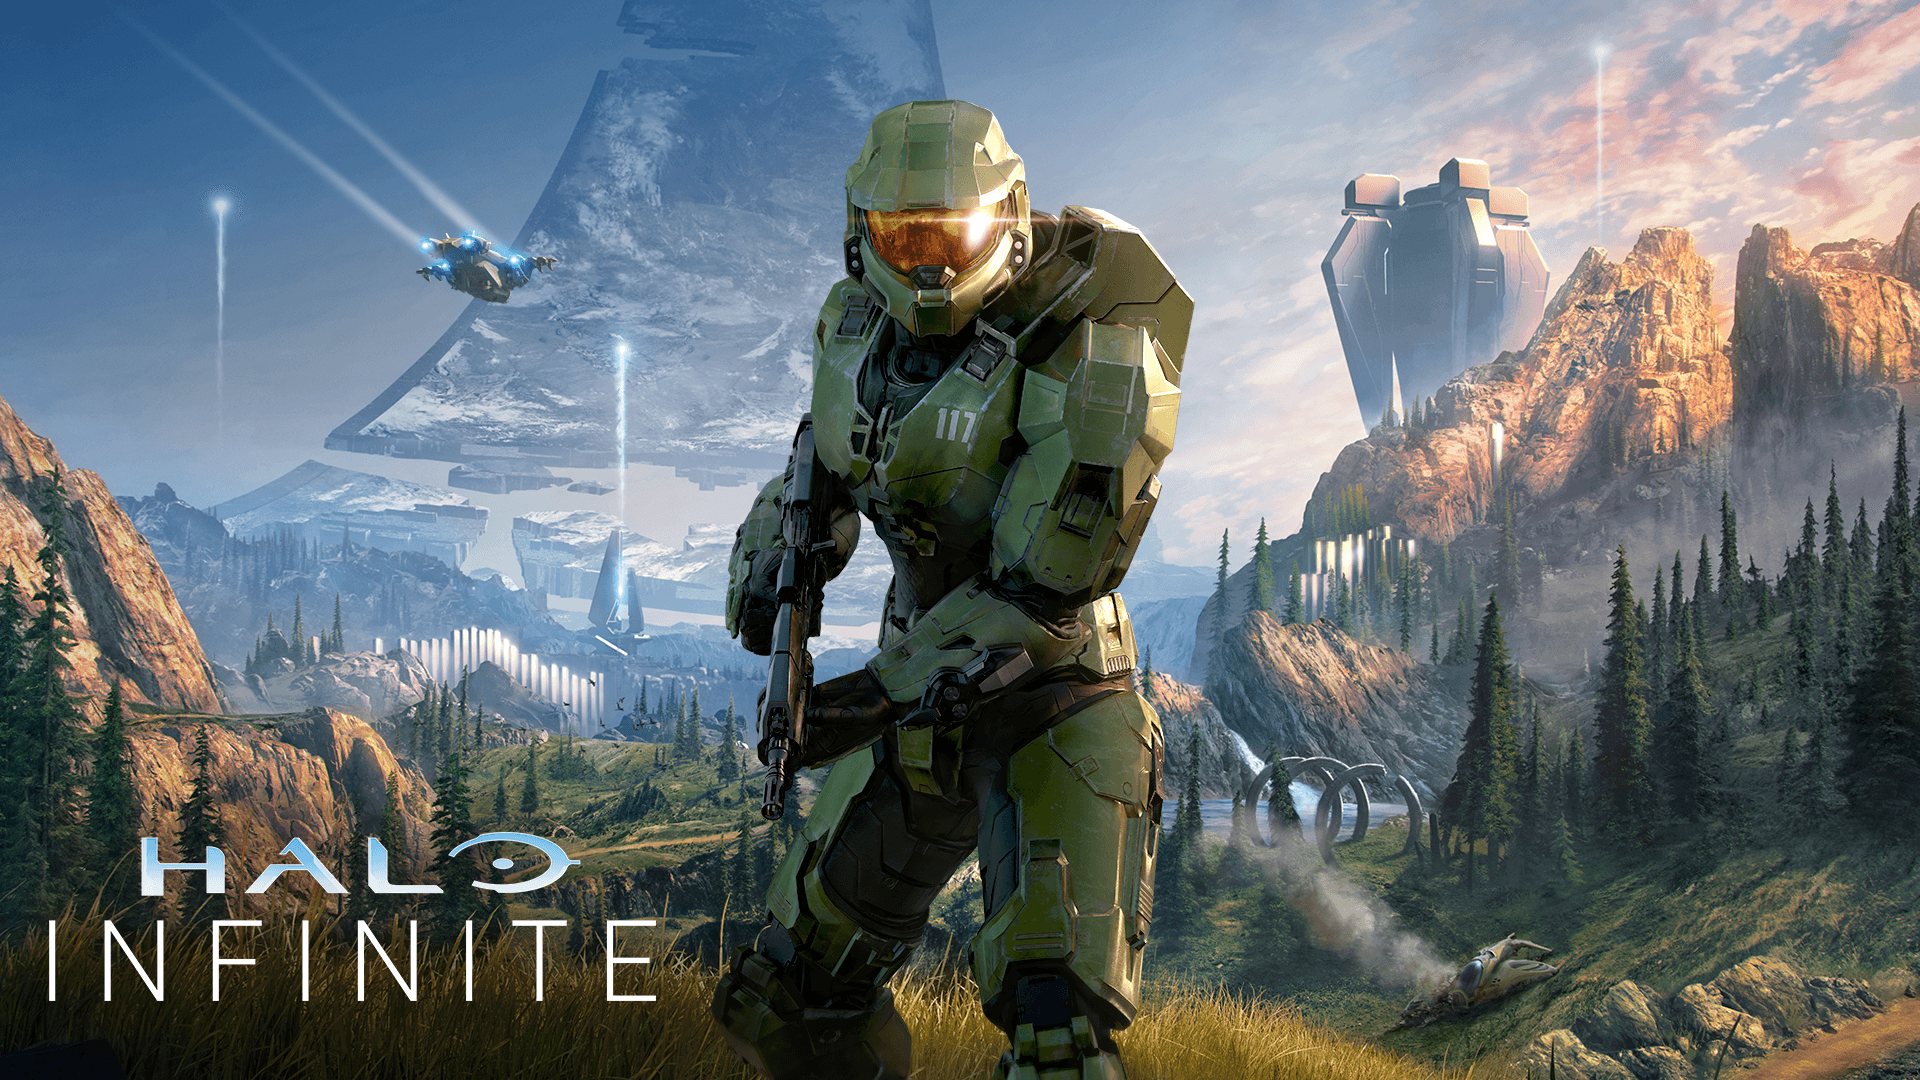 Halo Infinite key art gives clearest look yet at Master Chief's next adventure